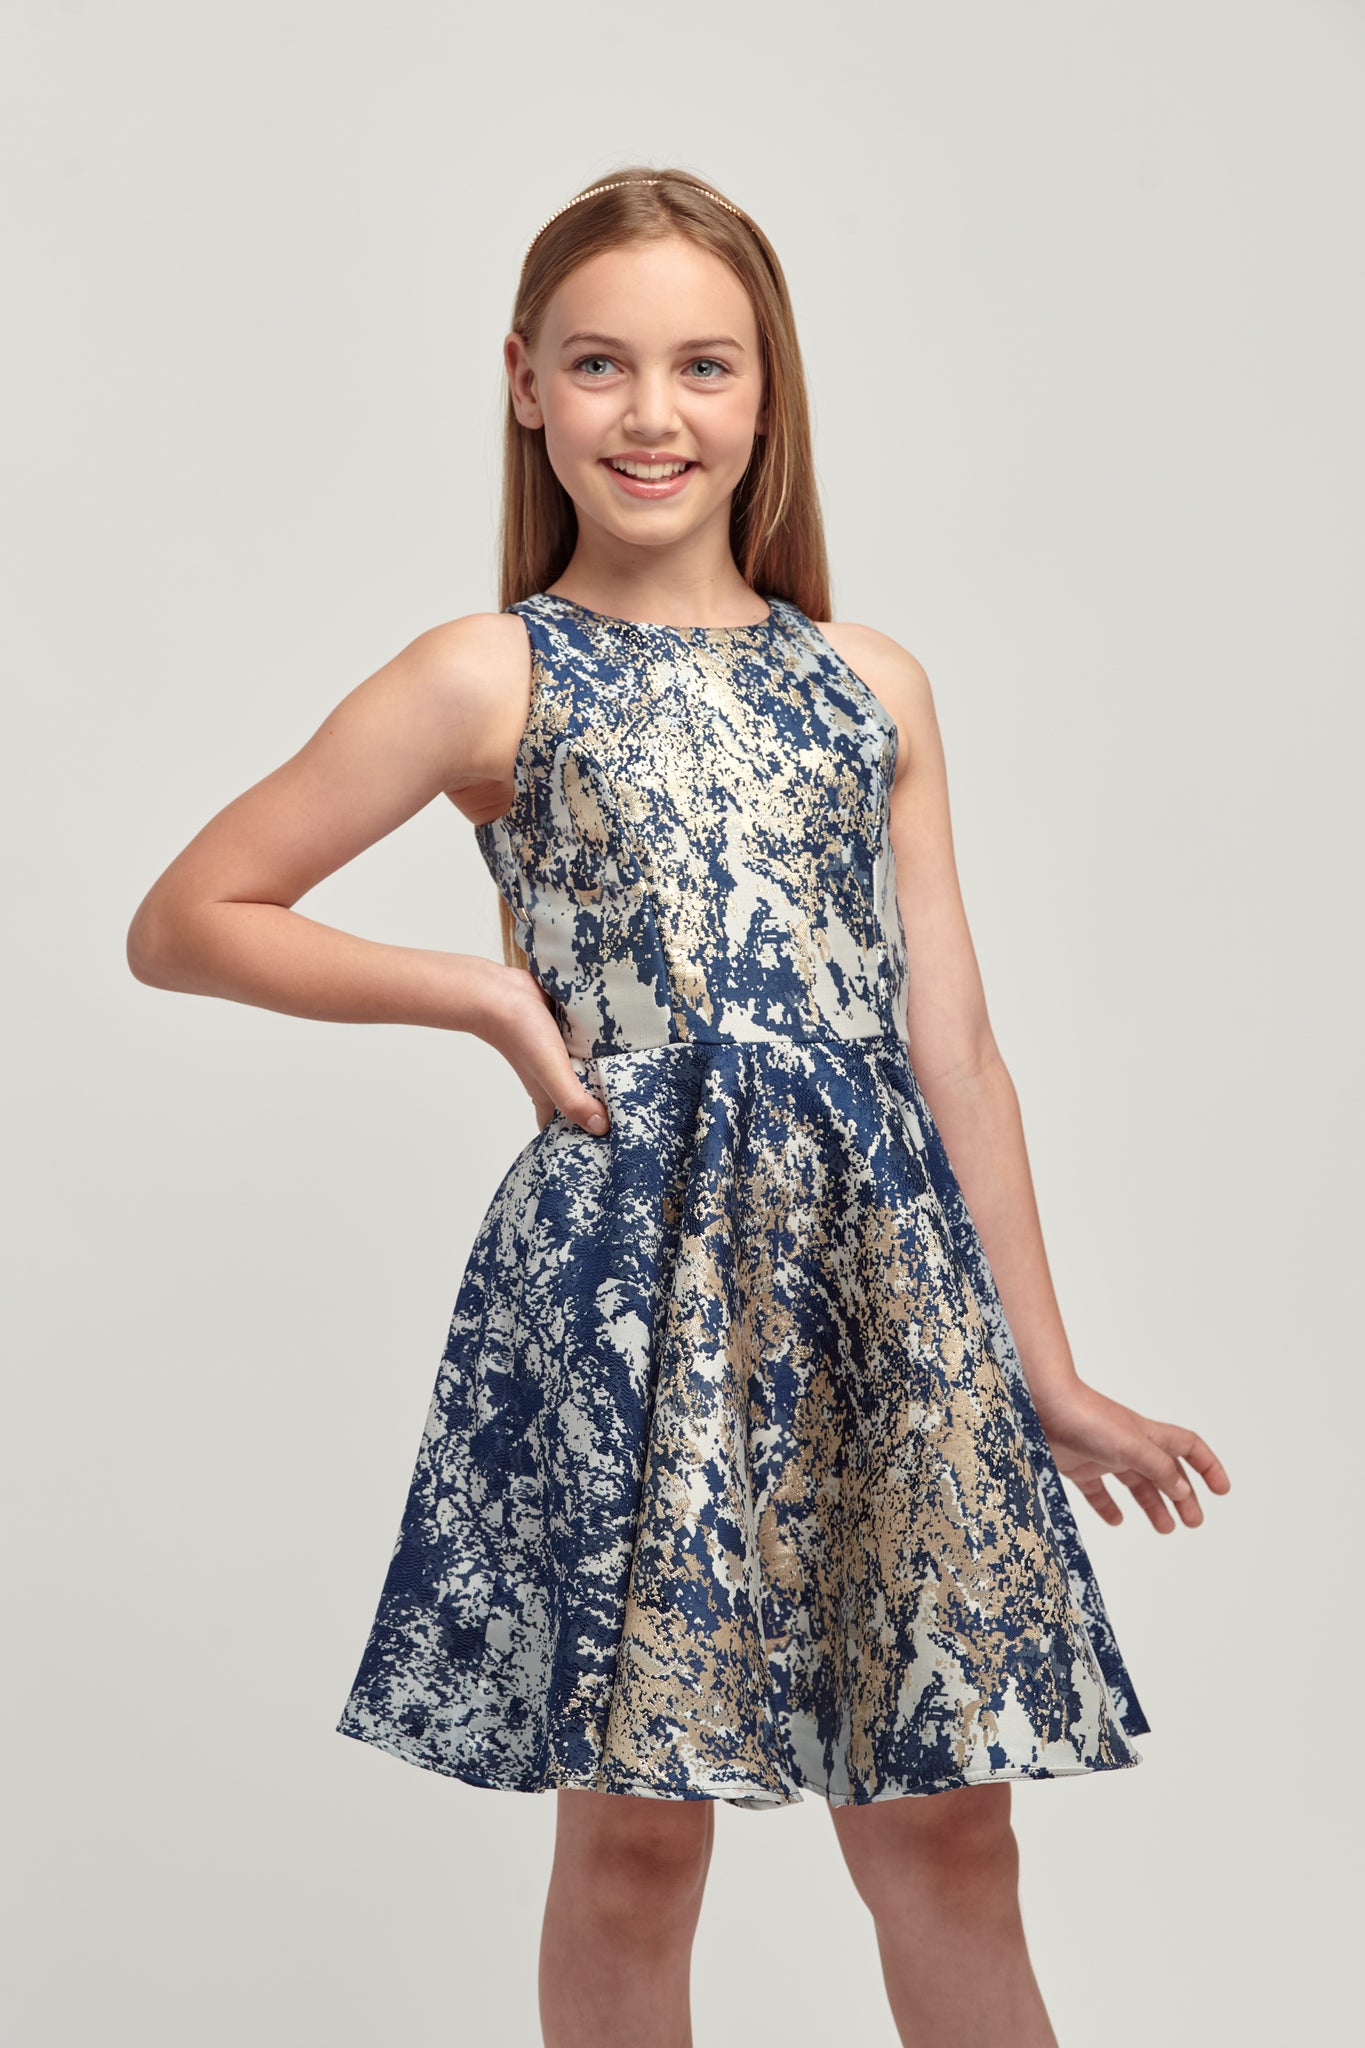 Young girl in navy and gold floral racerback style dress.